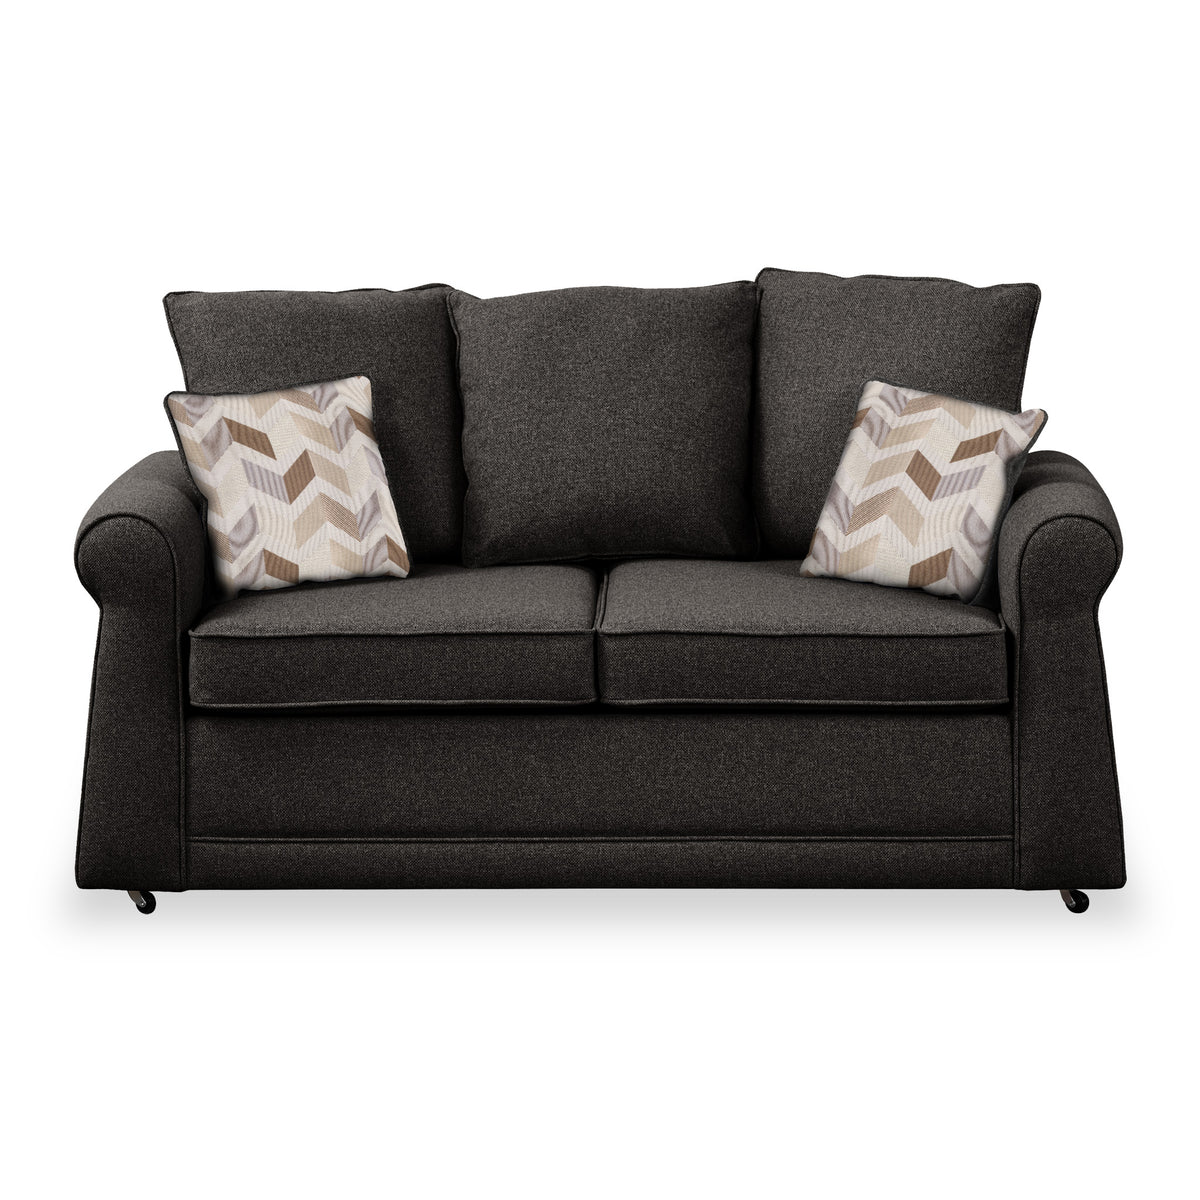 Broughton Faux Linen 2 Seater Sofabed with Oatmeal Scatter Cushions from Roseland Furniture